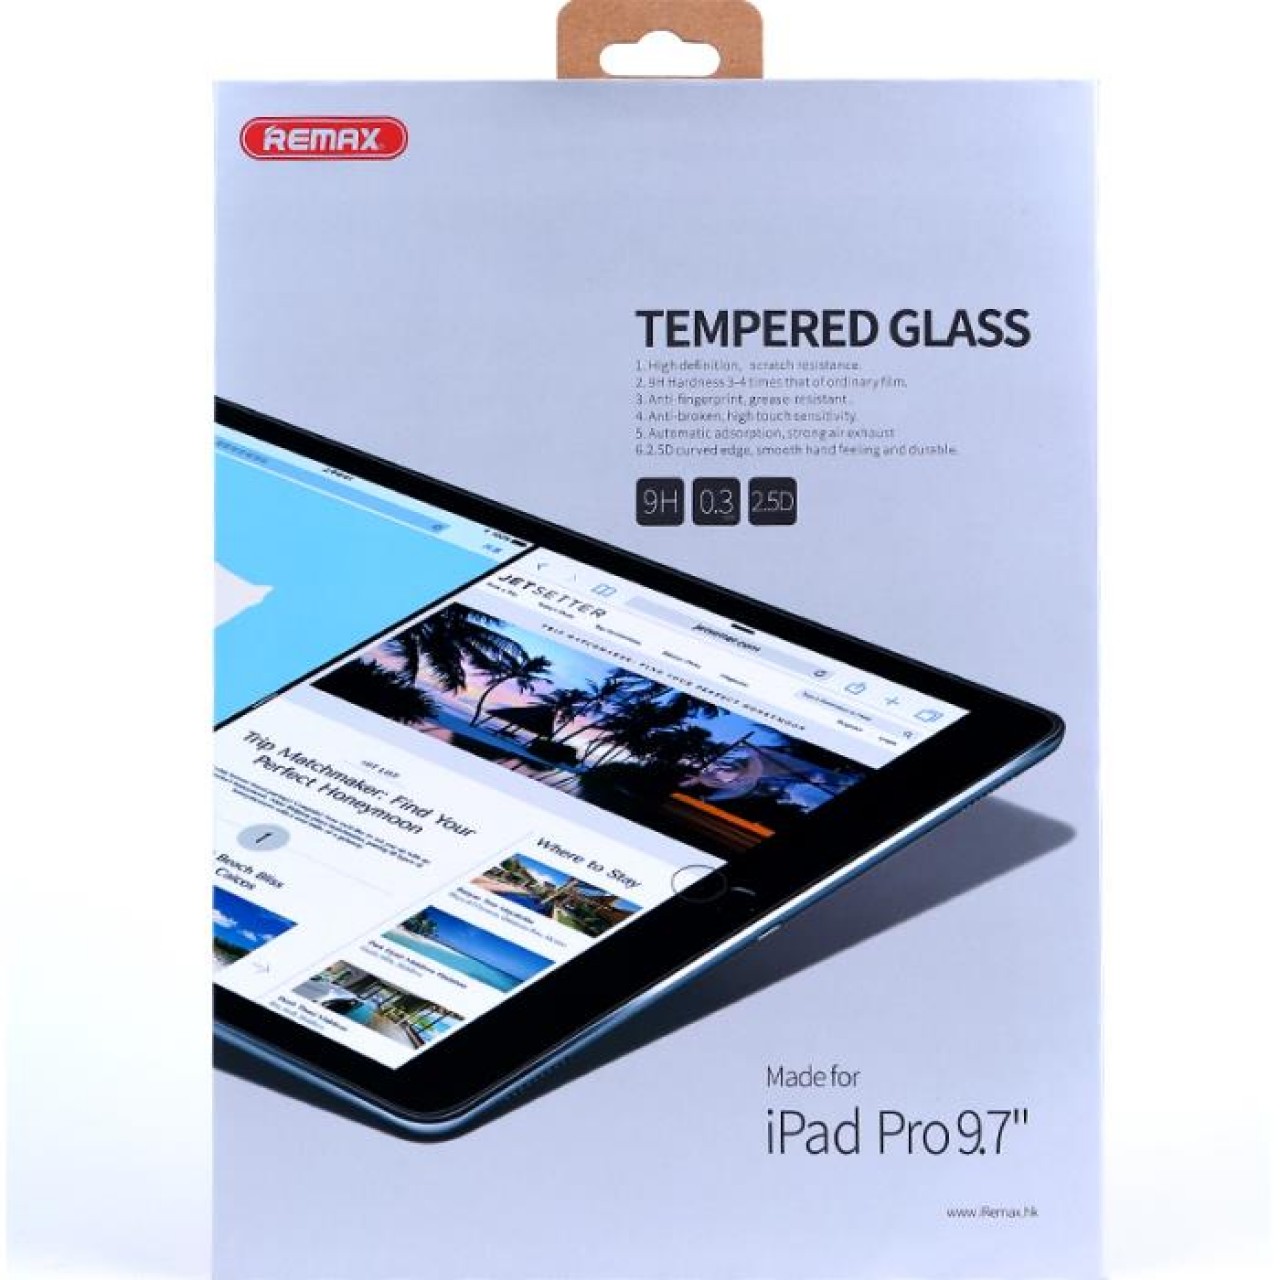 Tempered Glass Remax For iPad Pro 9.7